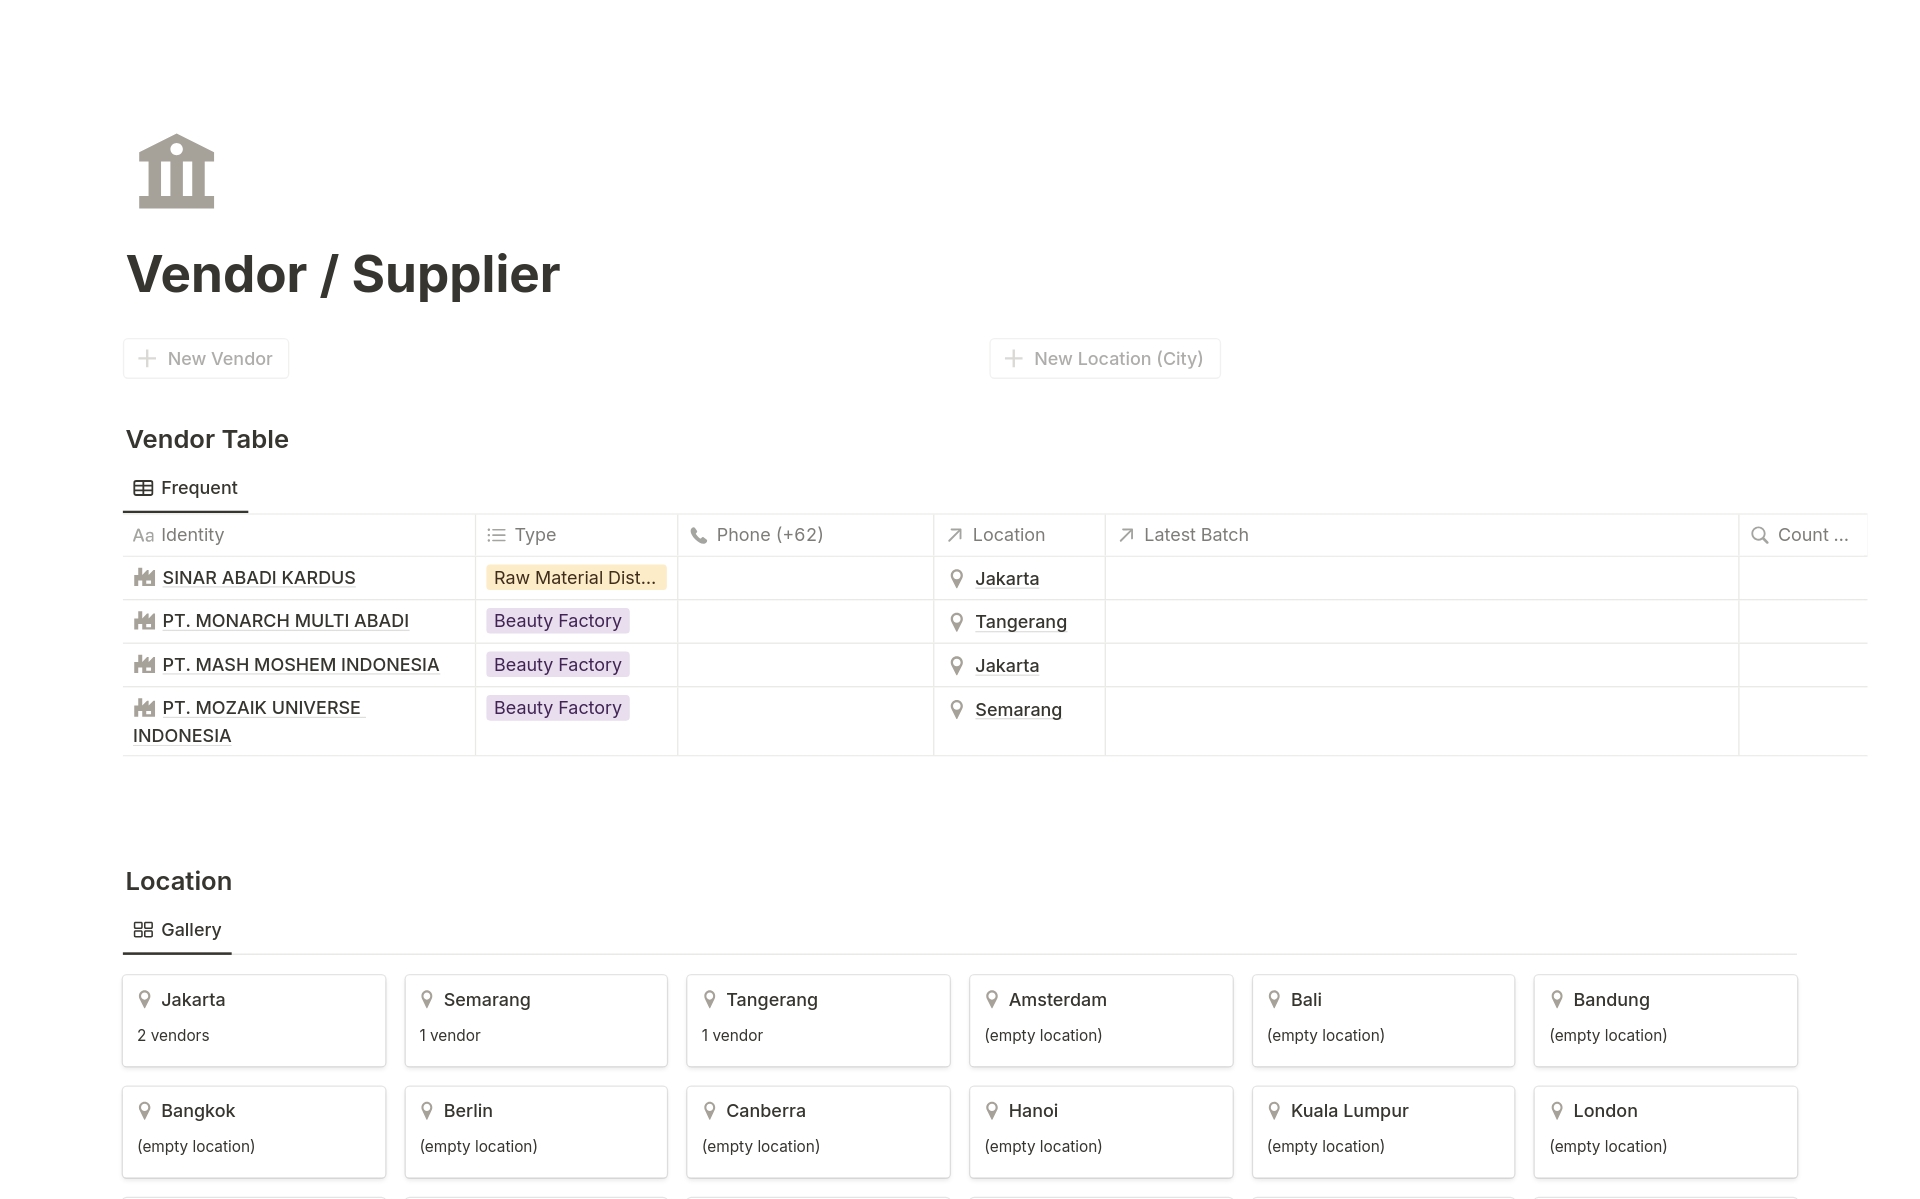 Streamline your supply chain management with our Notion template. Efficiently archive supplier and vendor data, including names, types, contact numbers, and locations. Centralize your business transactions and enhance supply chain visibility for smoother operations.